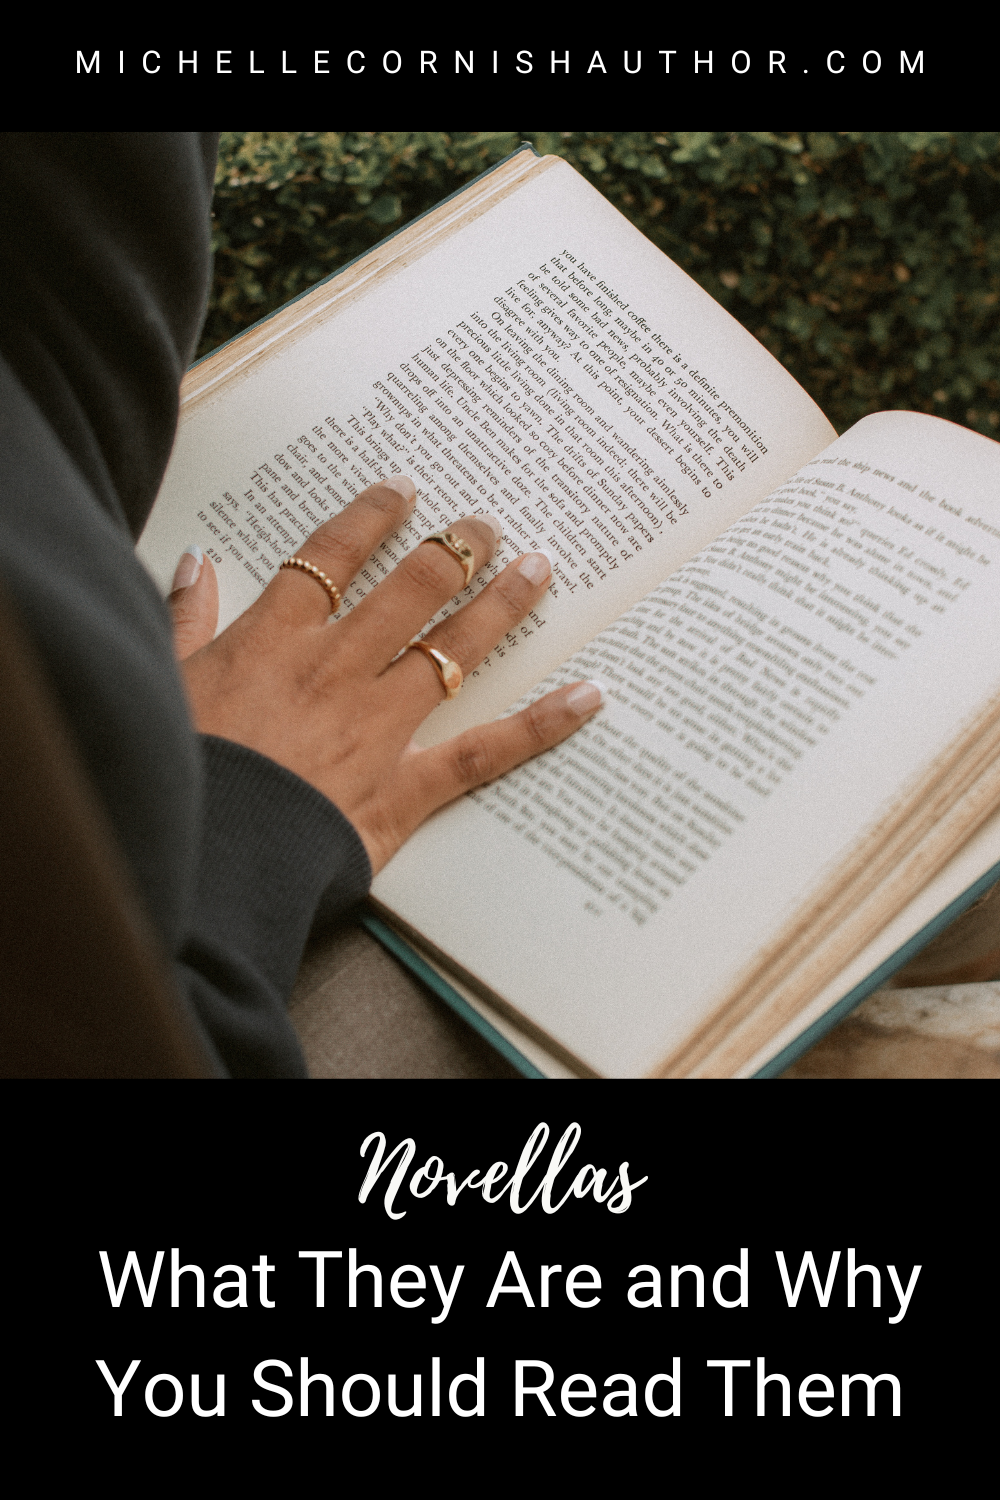 Novellas: What They Are and Why You Should Read Them